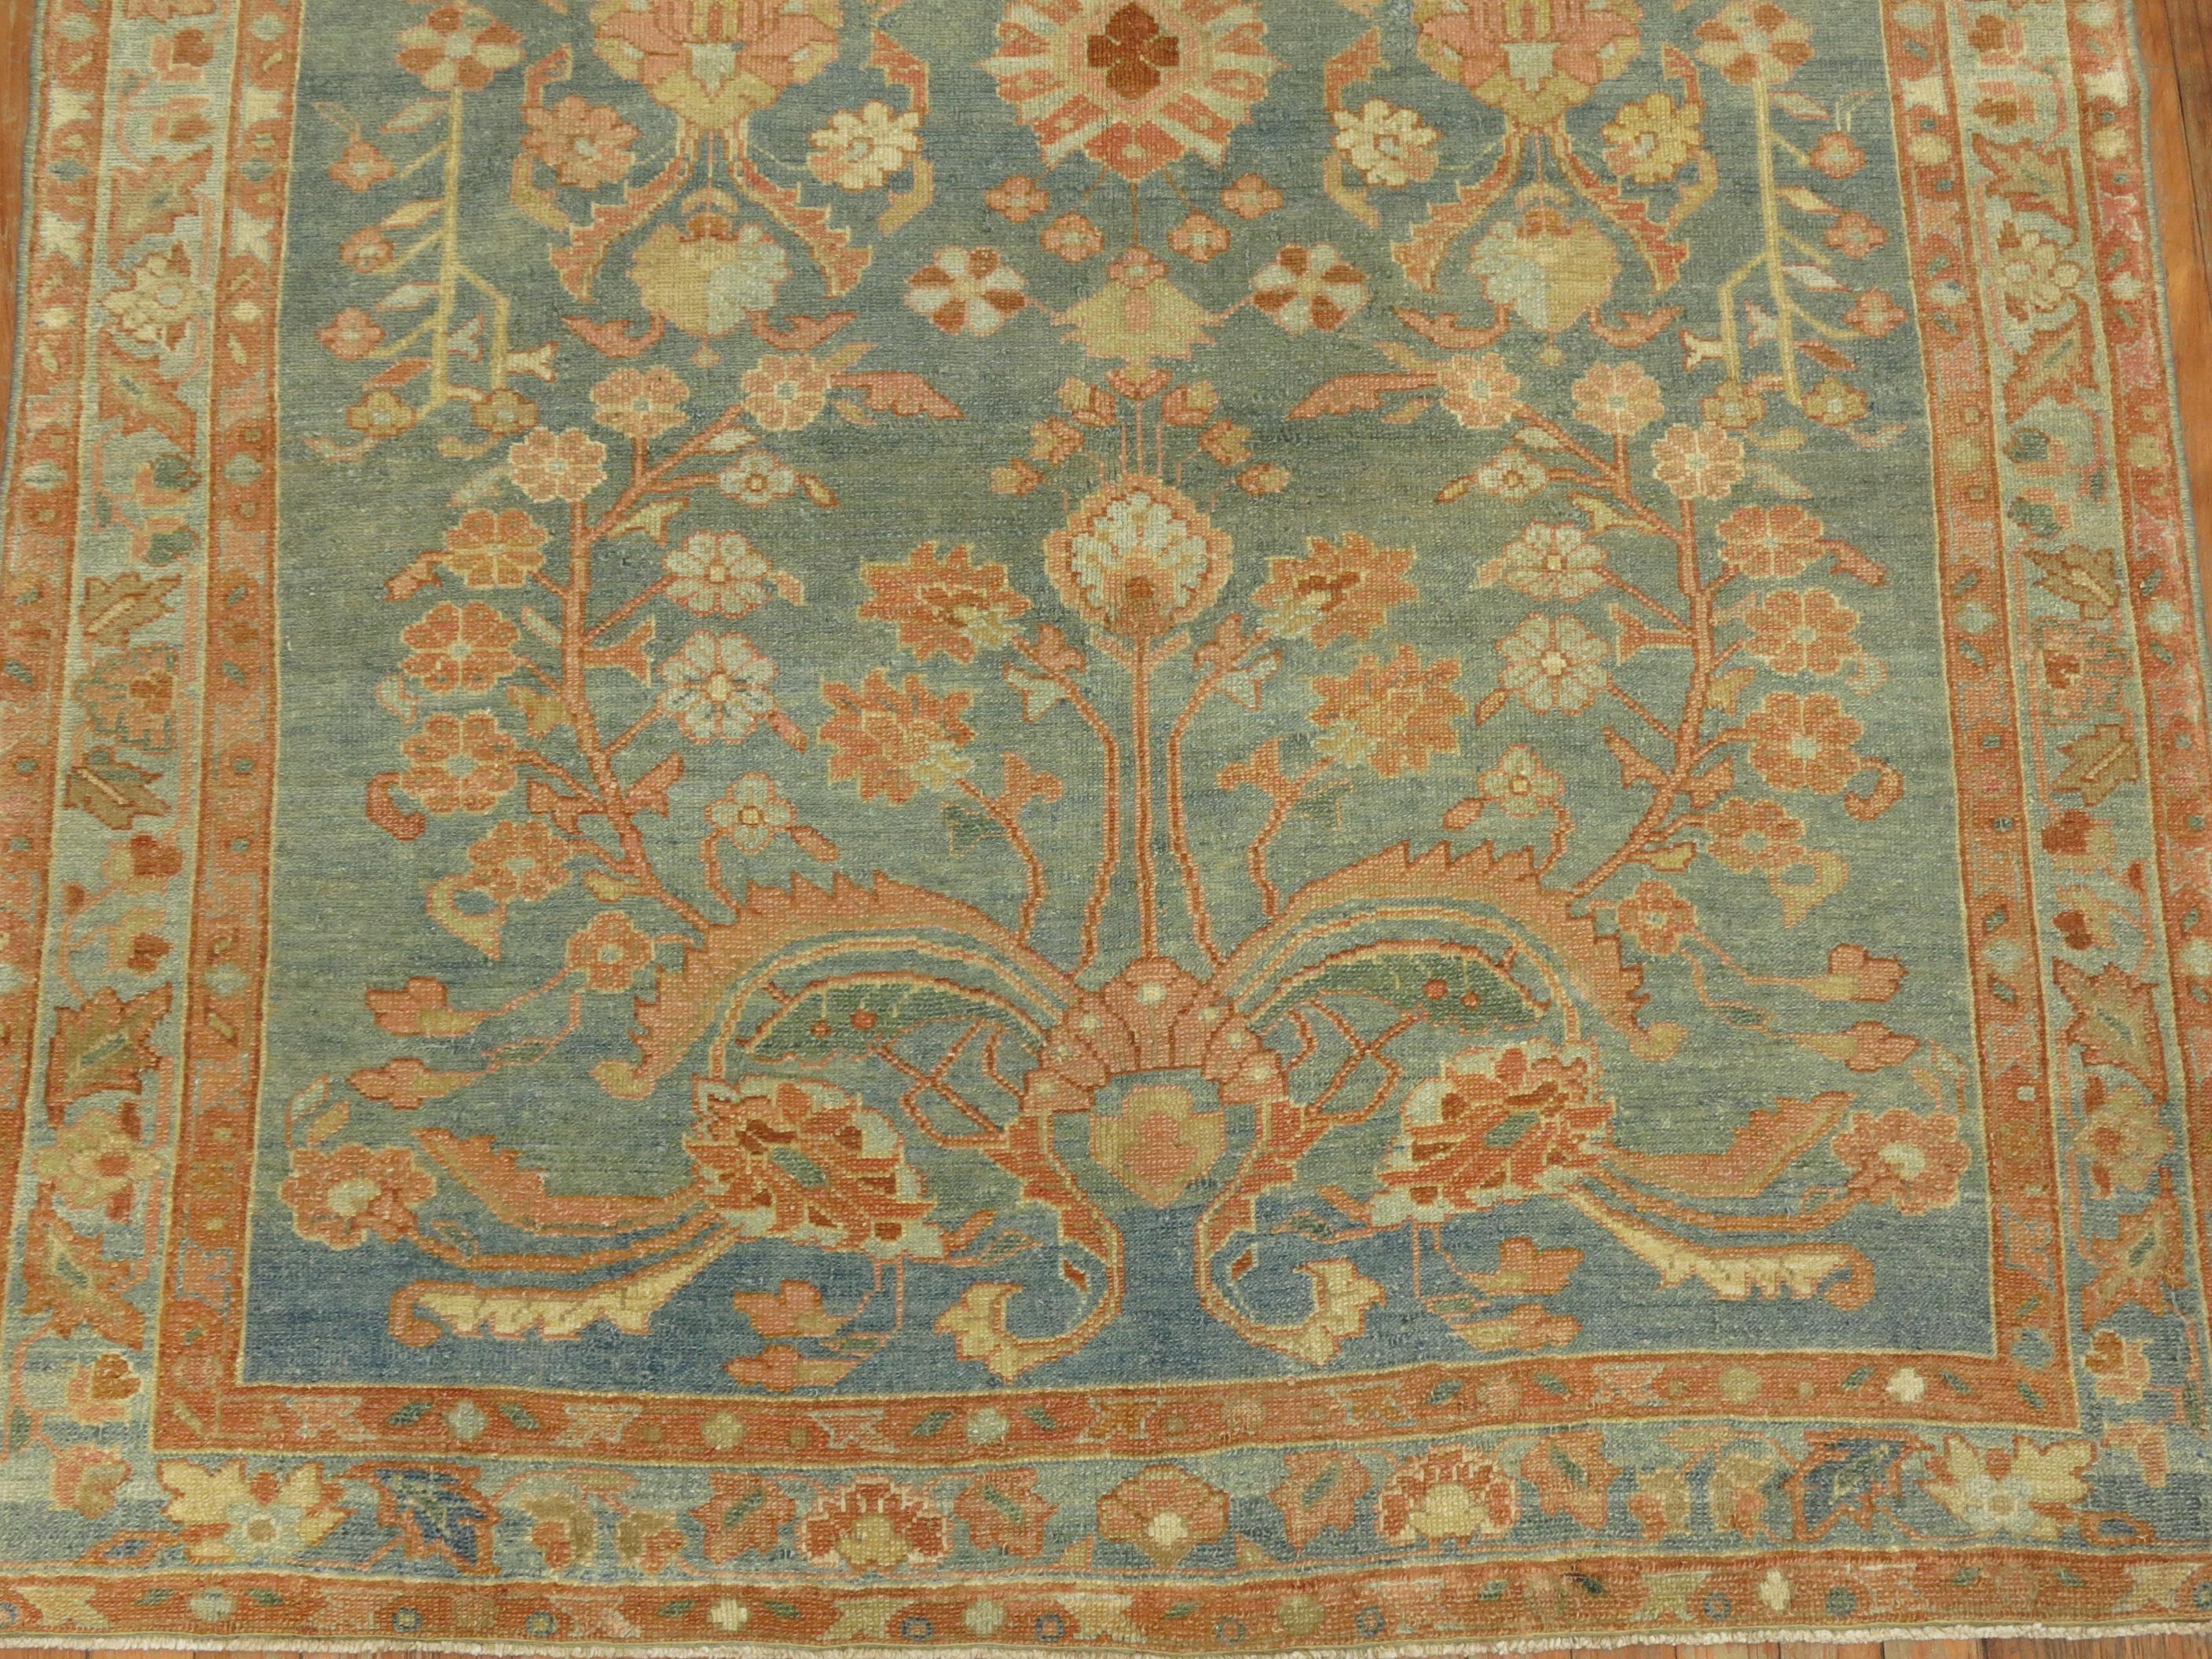 A formal Persian malayer foyer accent size rug from the early 20th century.

Measures: 4'5” x 6'5''.